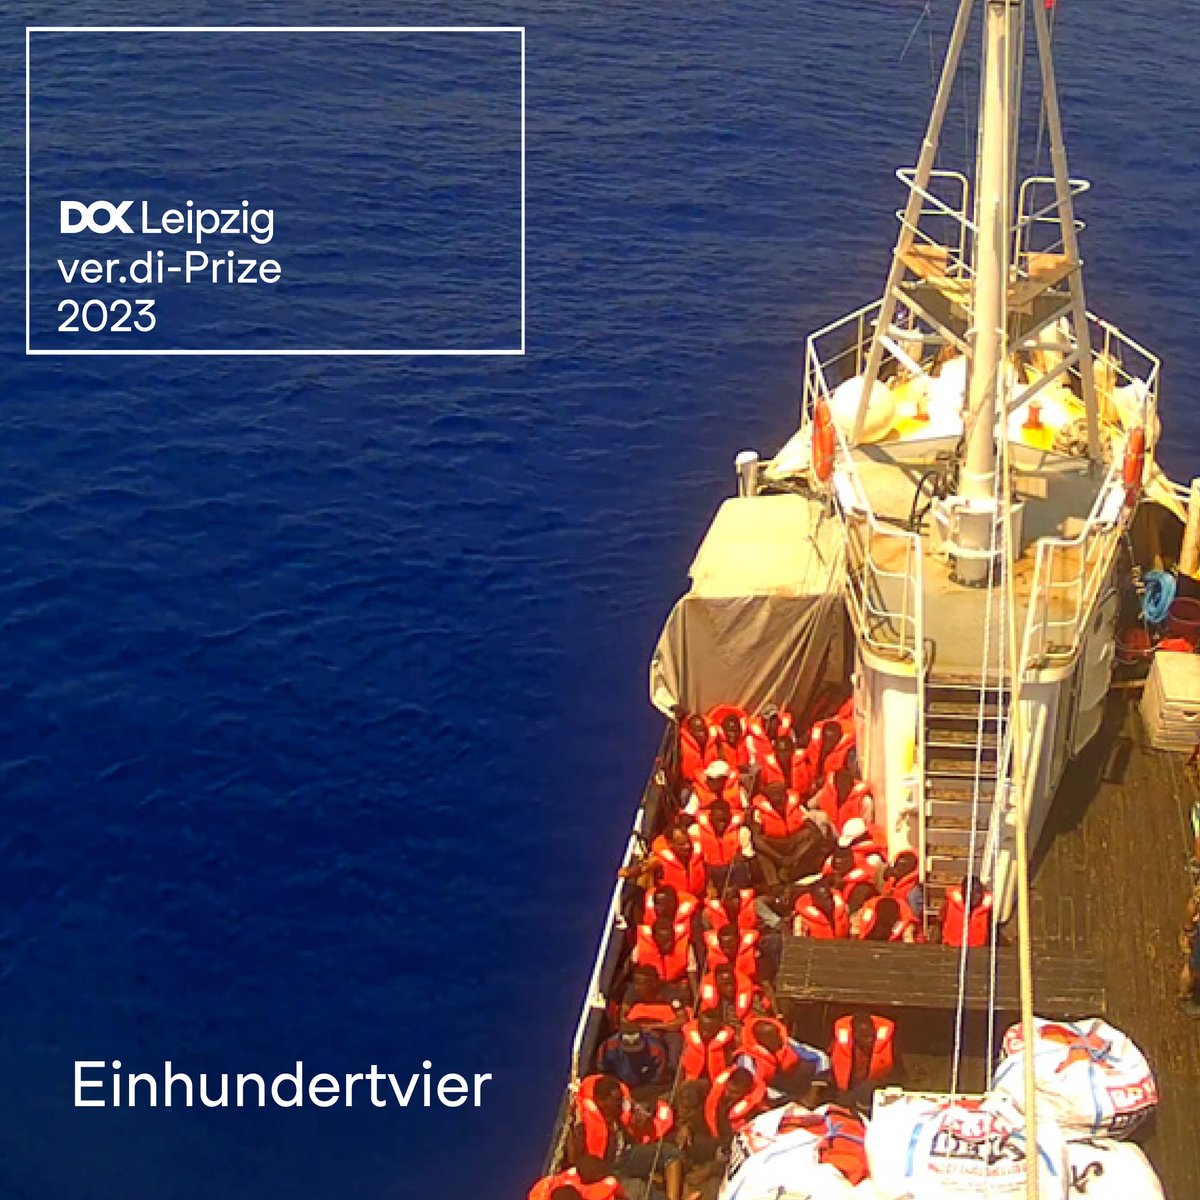 “Einhundertvier” further received the @_verdi Prize for Solidarity, Humanity and Fairness. Amazing!